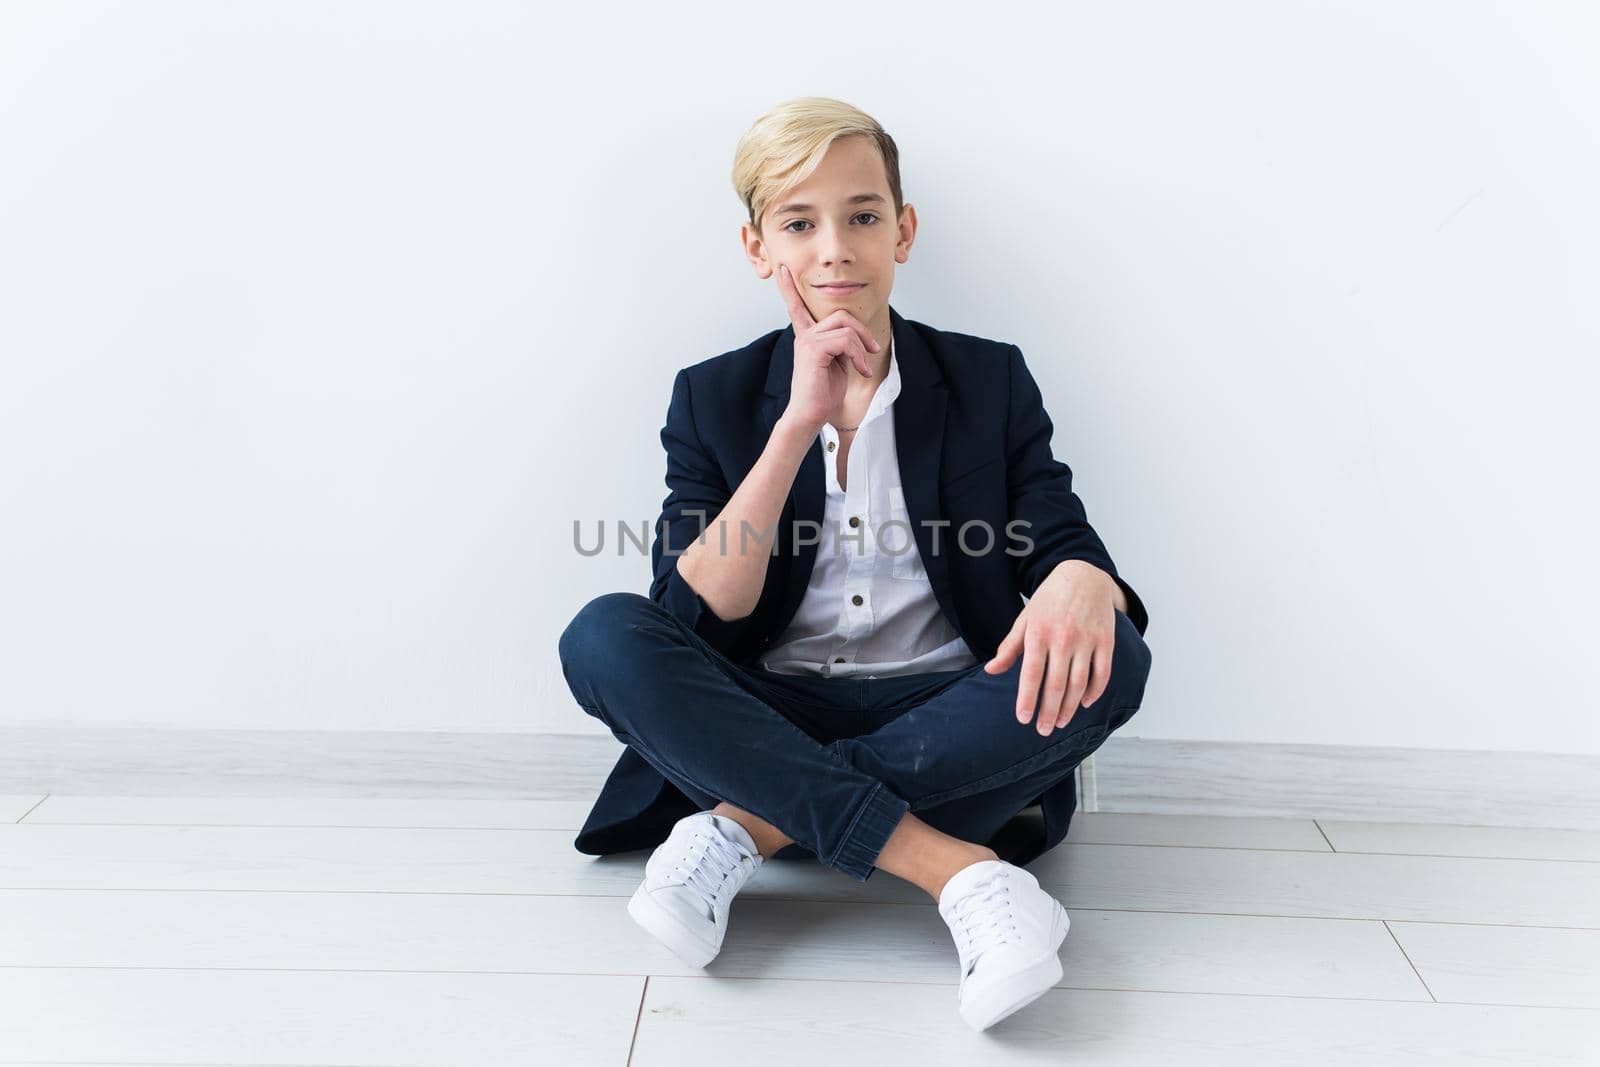 Puberty concept - Teenage boy portrait on a white background. by Satura86